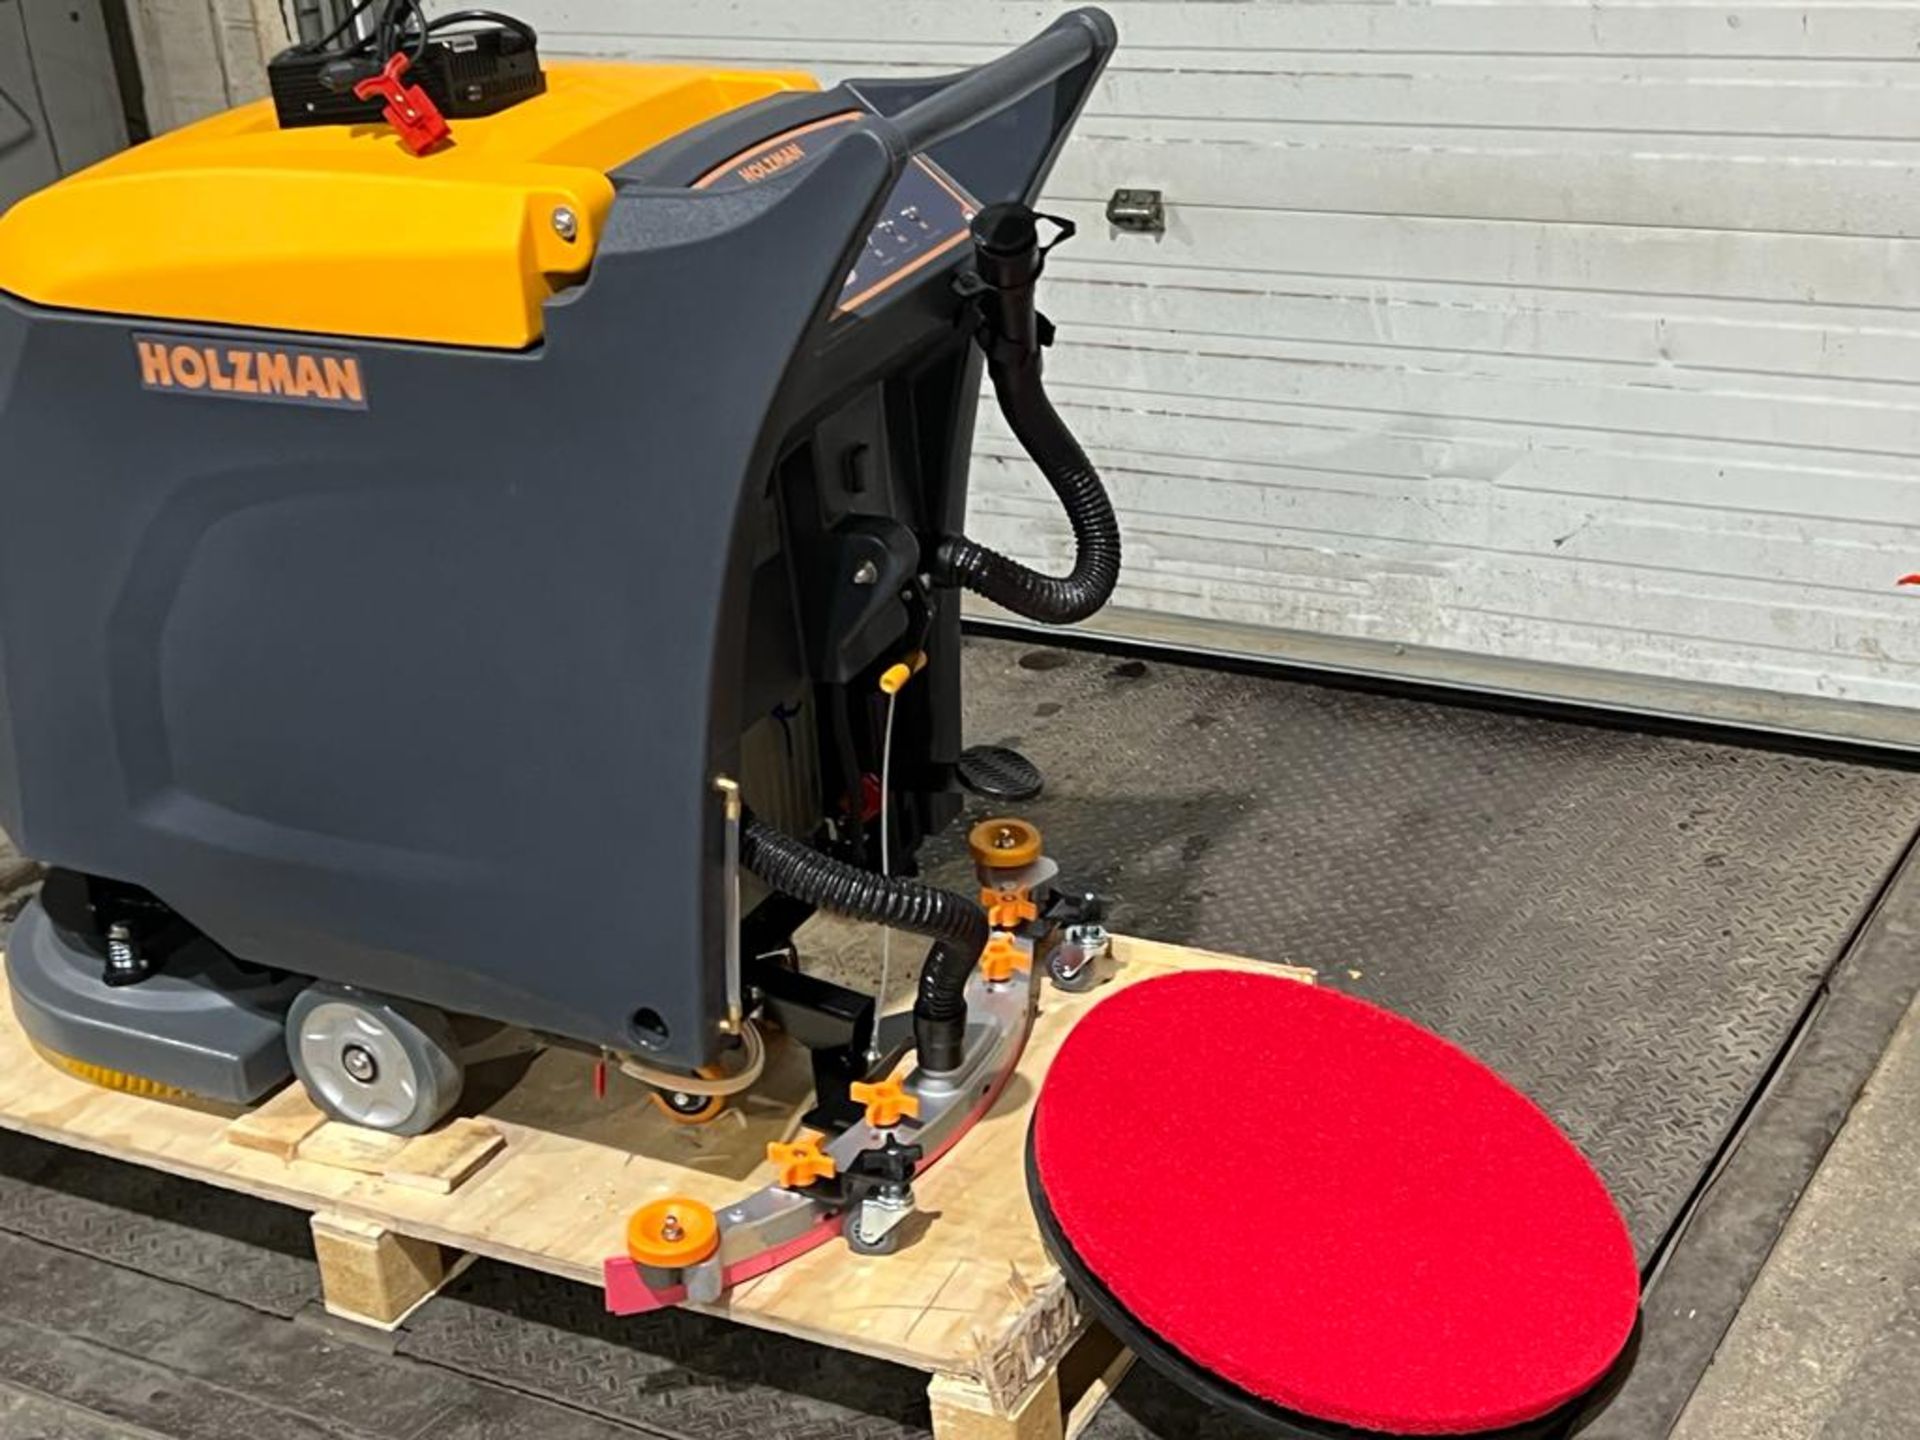 Holzman MINT Walk Behind Floor Sweeper Scrubber Unit model M50 - BRAND NEW with extra pads, digital - Image 6 of 7